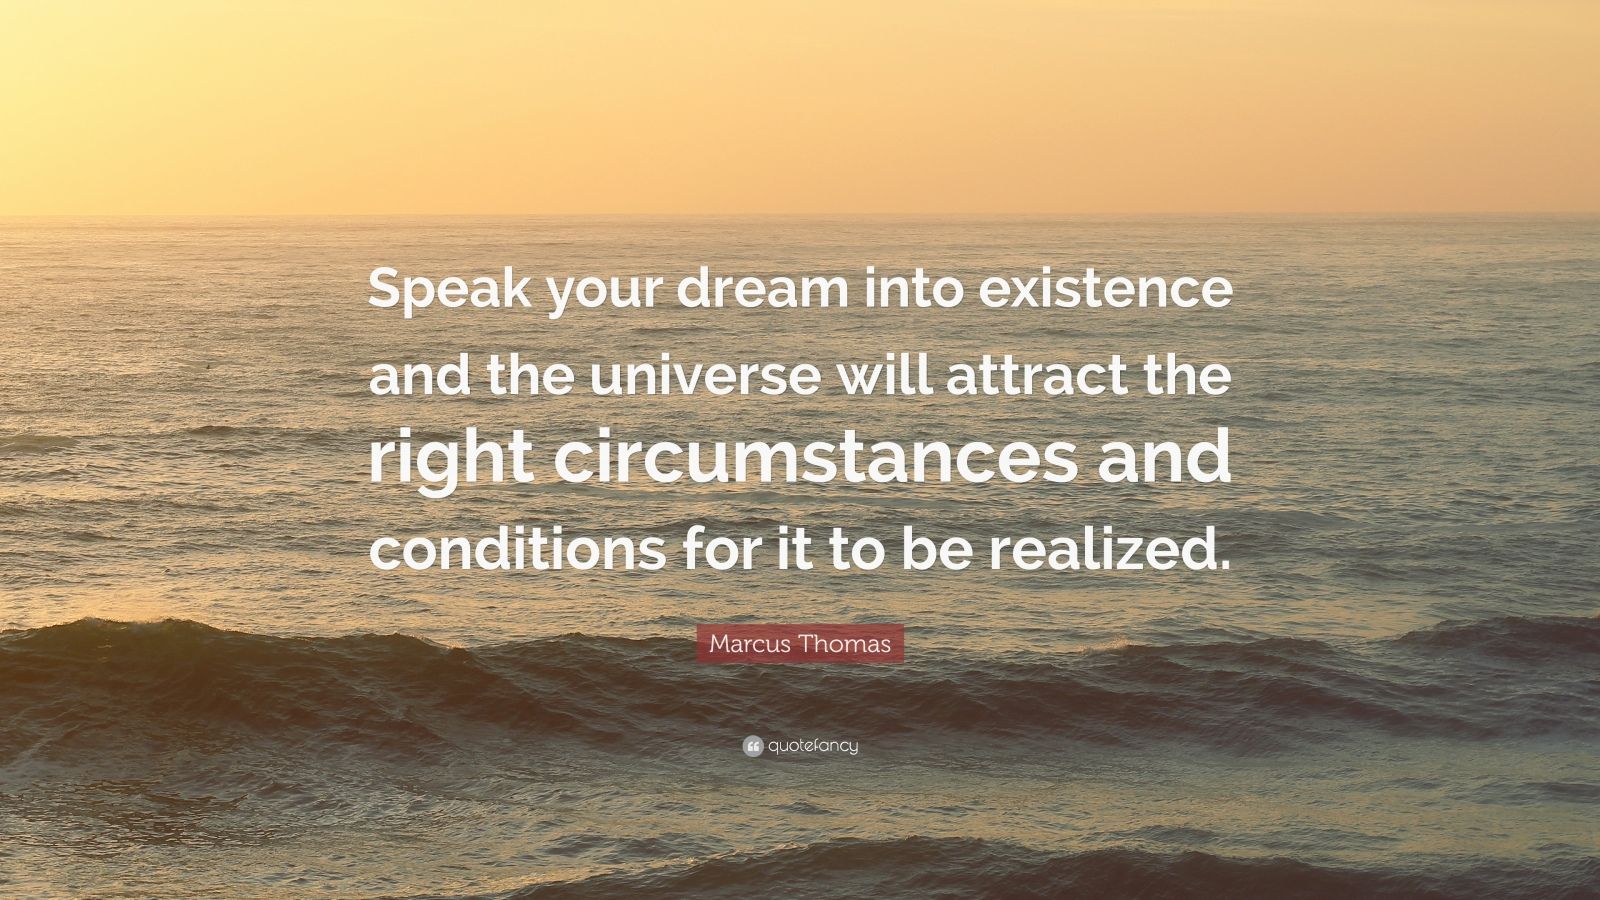 Marcus Thomas Quote: “Speak your dream into existence and the universe ...